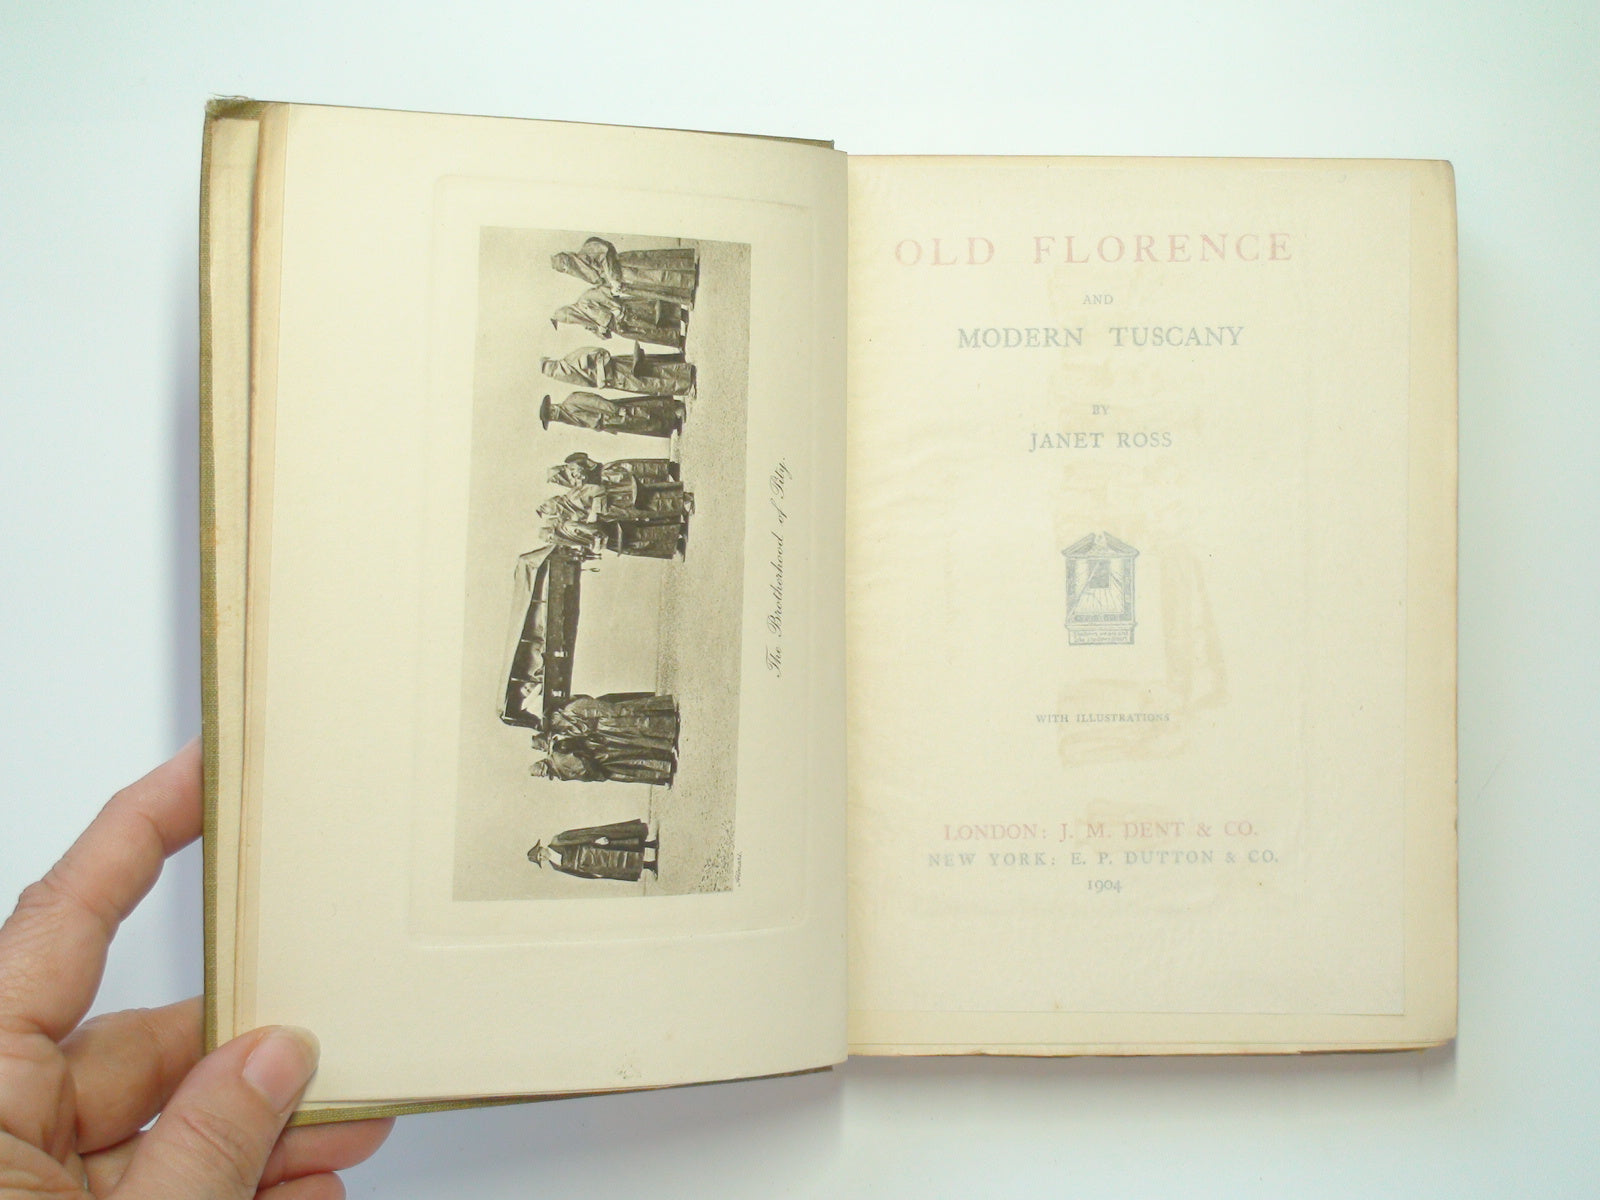 Old Florence and Modern Tuscany by Janet Ross, Illustrated, J. M. Dent, 1904